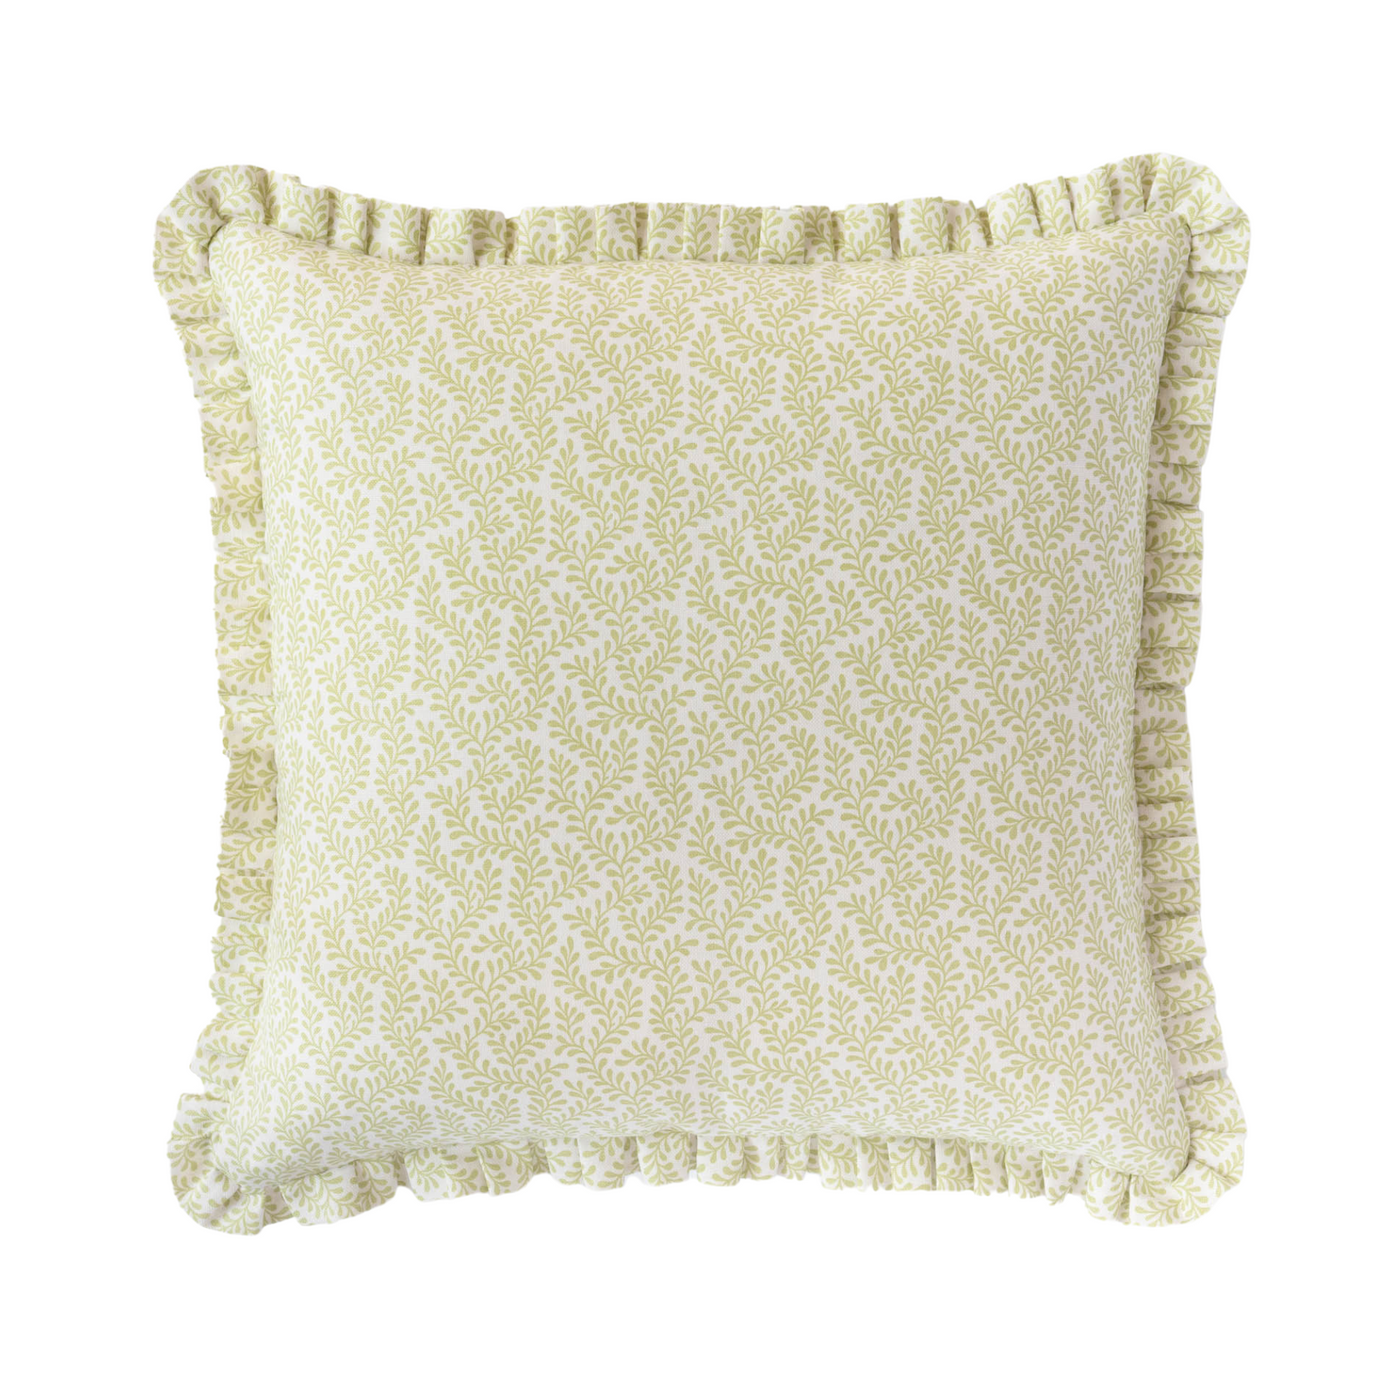 Colefax & Fowler Blythe Leaf Ruffle Pillow - Maxine Makes